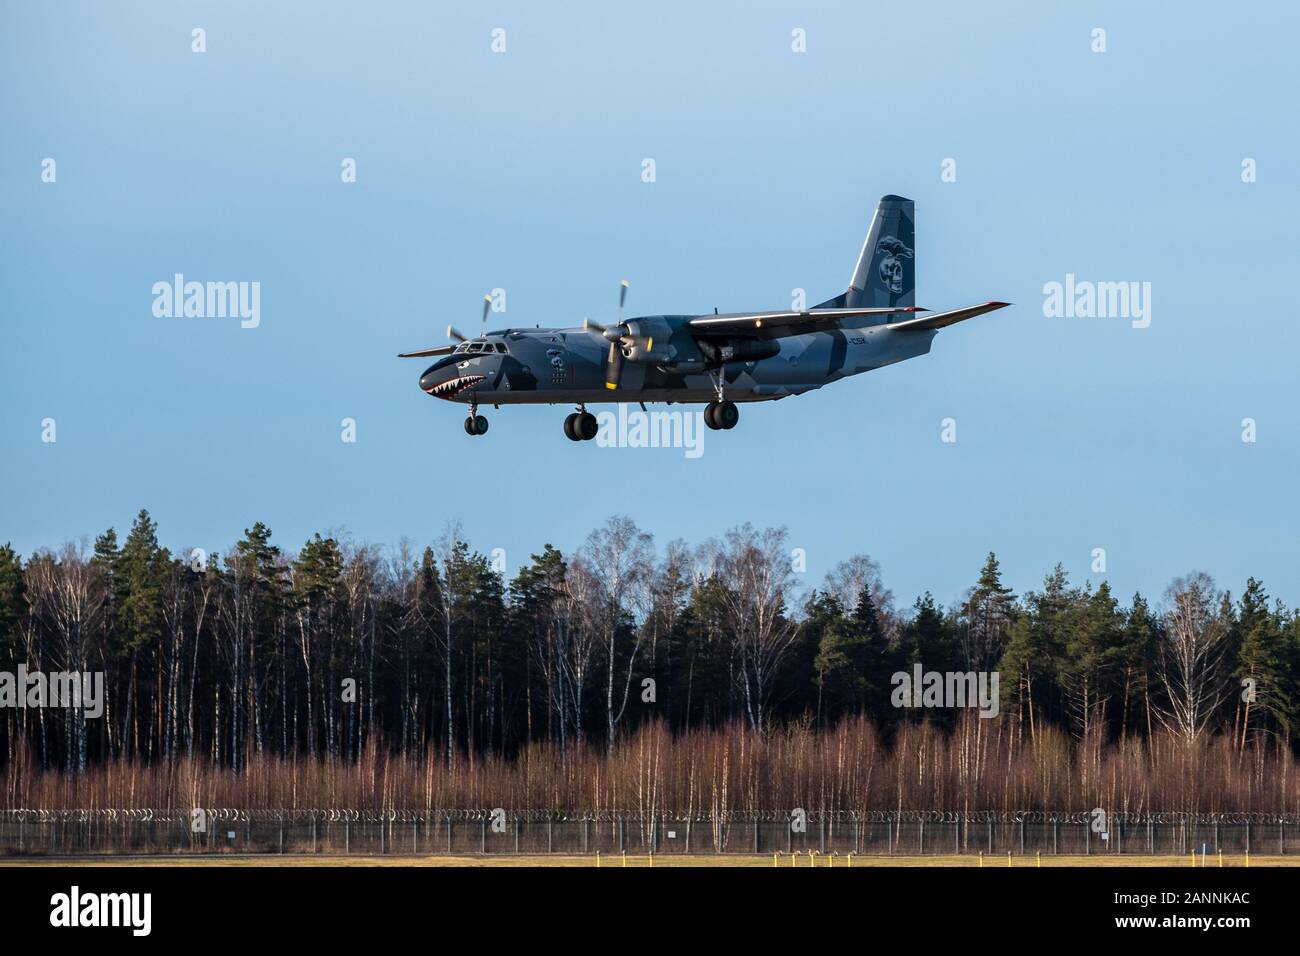 RIGA, LATVIA, JANUARY 17, 2020 - Ukranian airline Eleron cargo plane Antonov An-26B UR-CSK in special livery lands at Riga international Airport. The plane was used in Hollywood movie Expendables Stock Photo